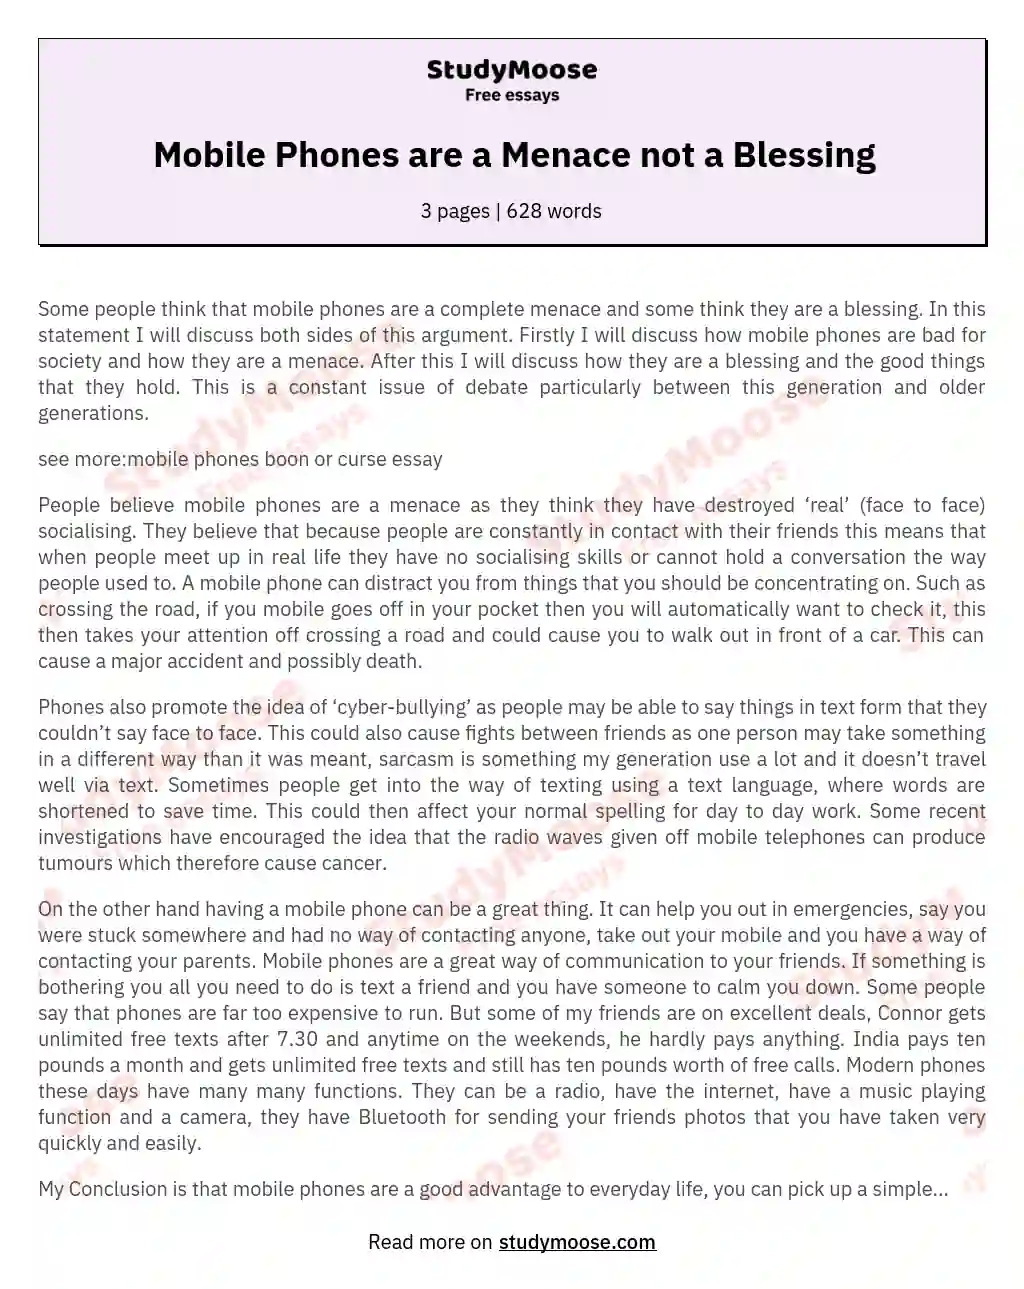 Mobile Phones are a Menace not a Blessing essay